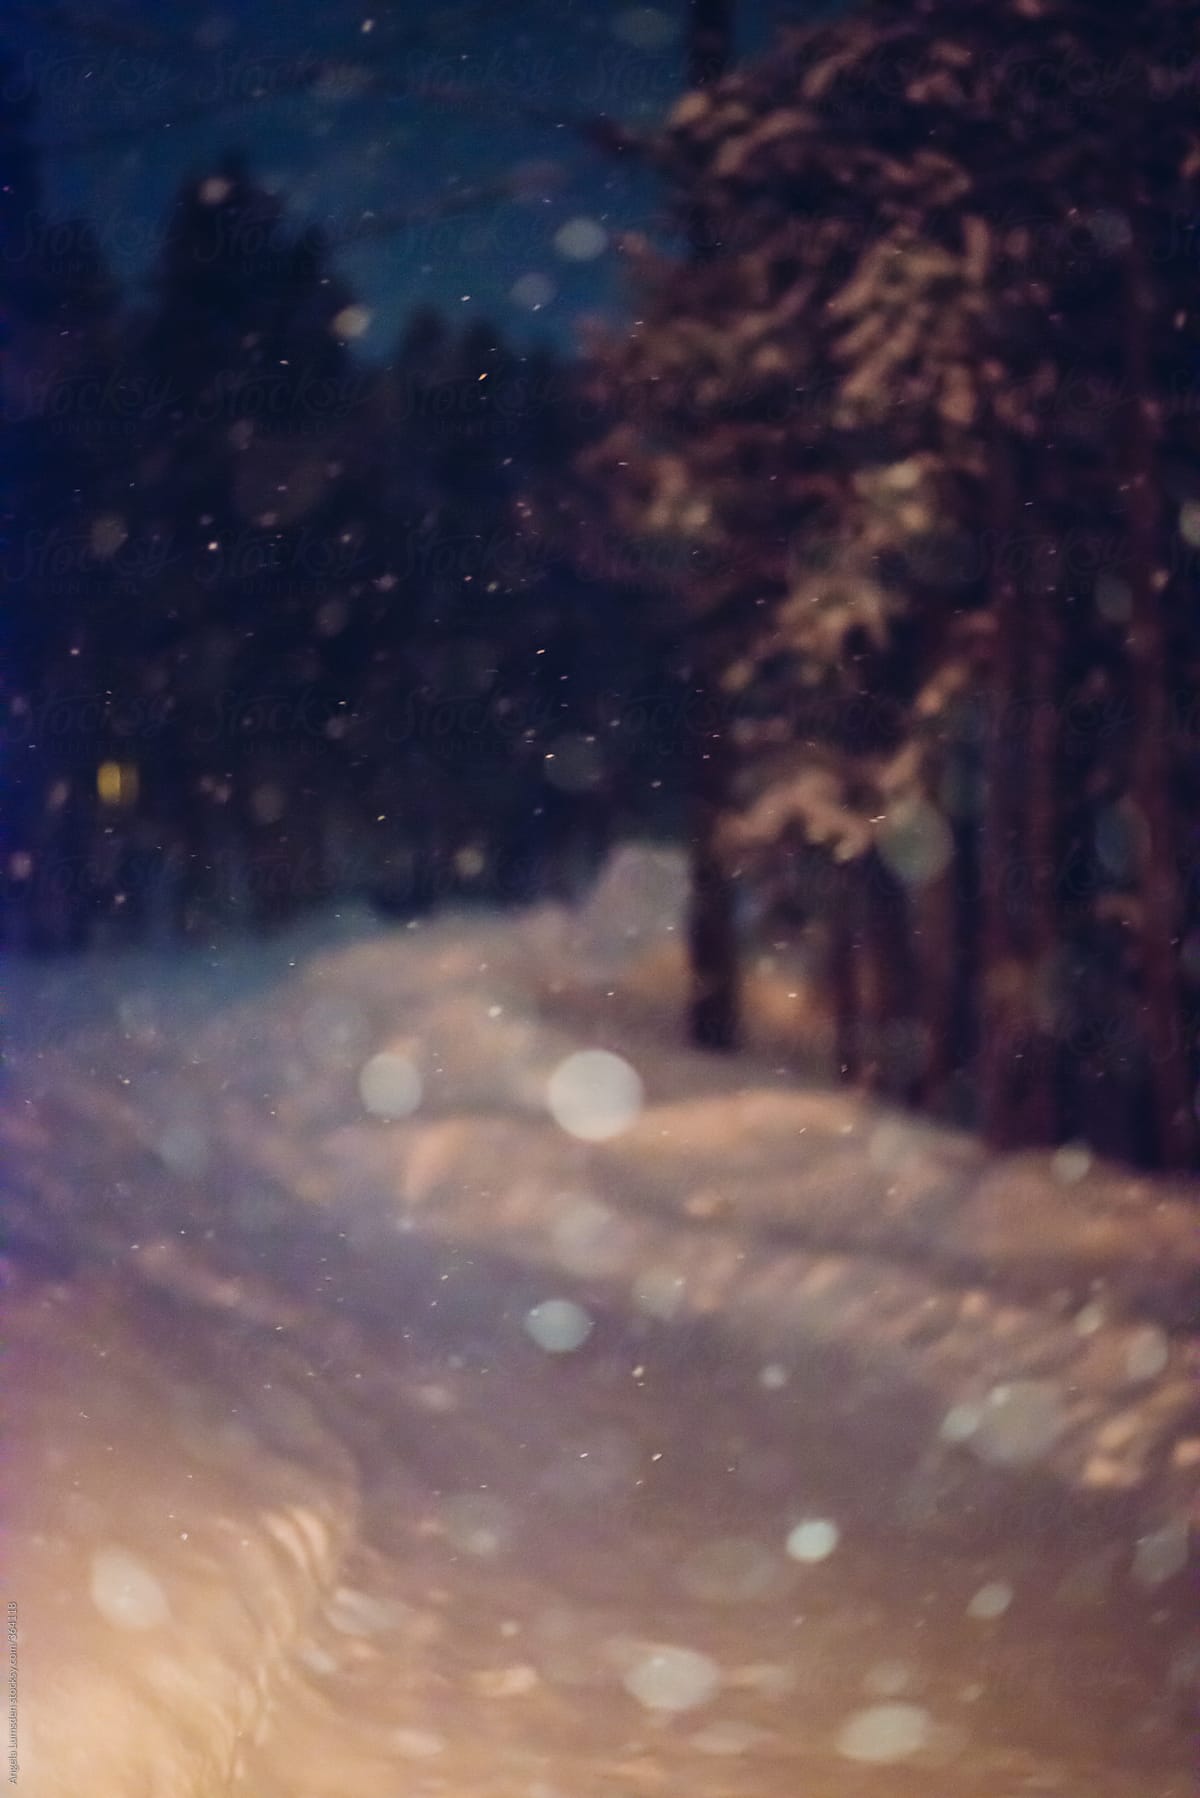 Defocused image of snow falling on a snow covered driveway at night